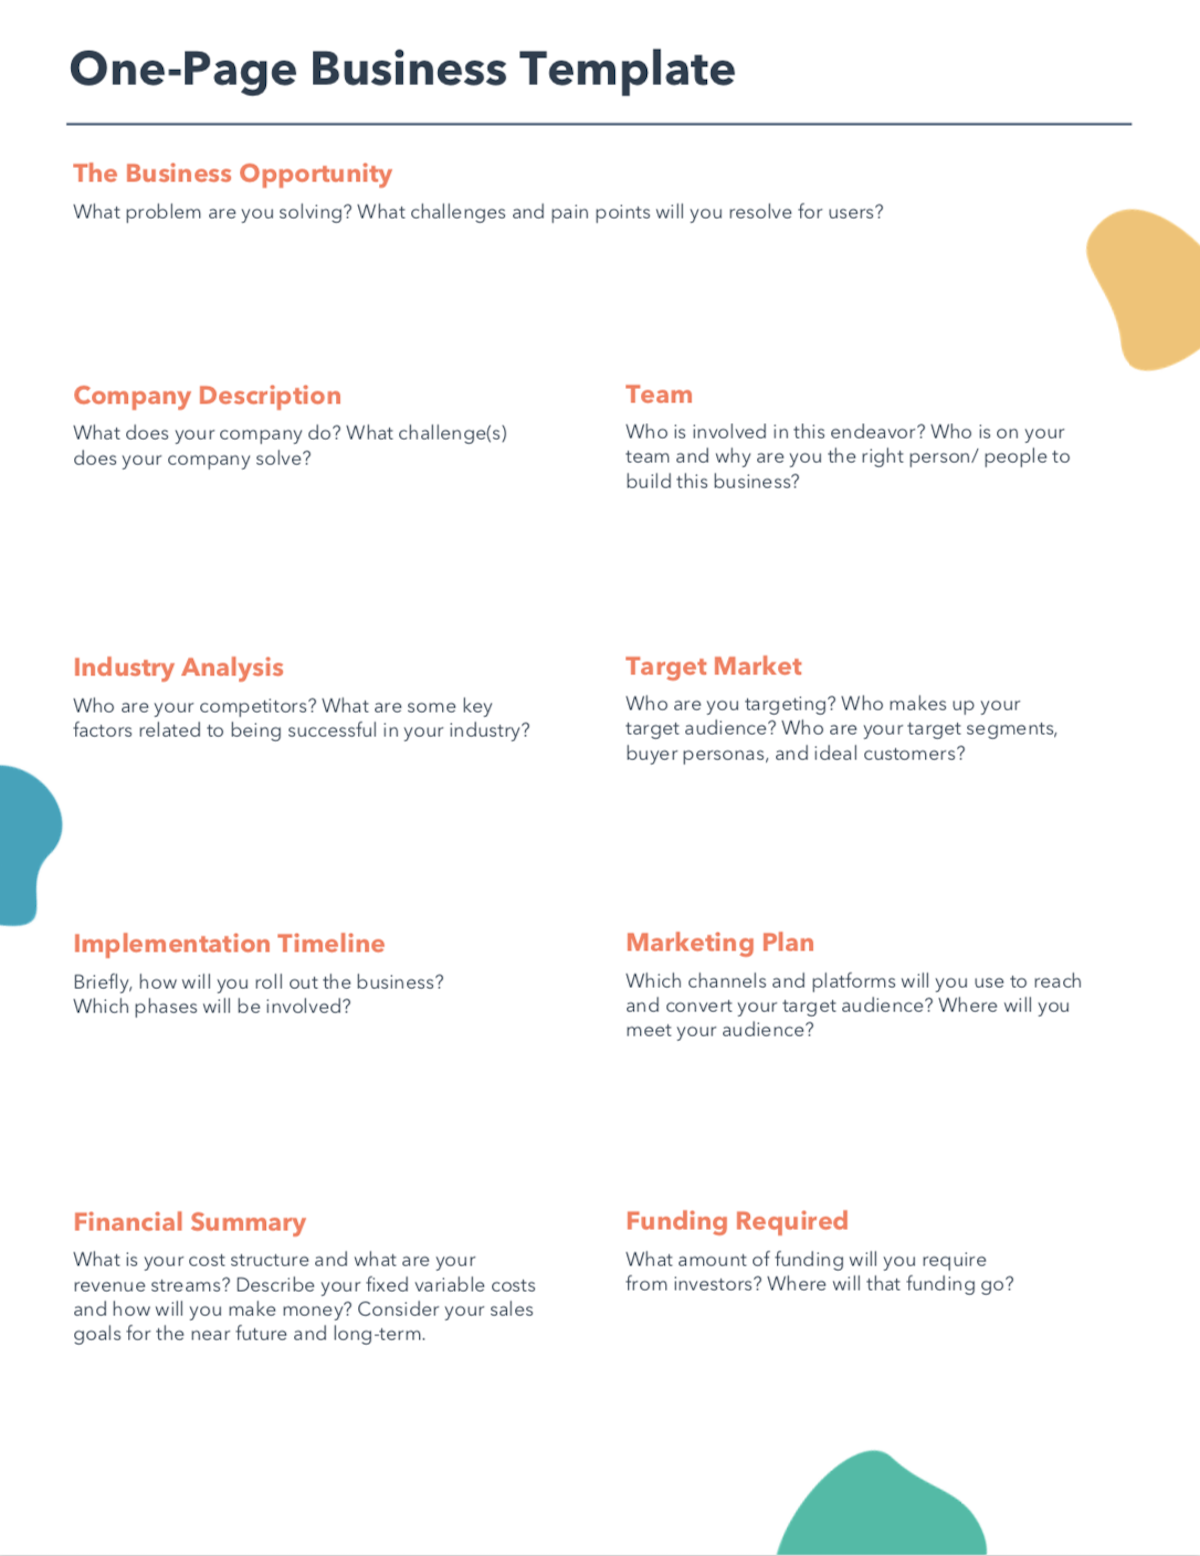 Simple Startup Business Plan Template